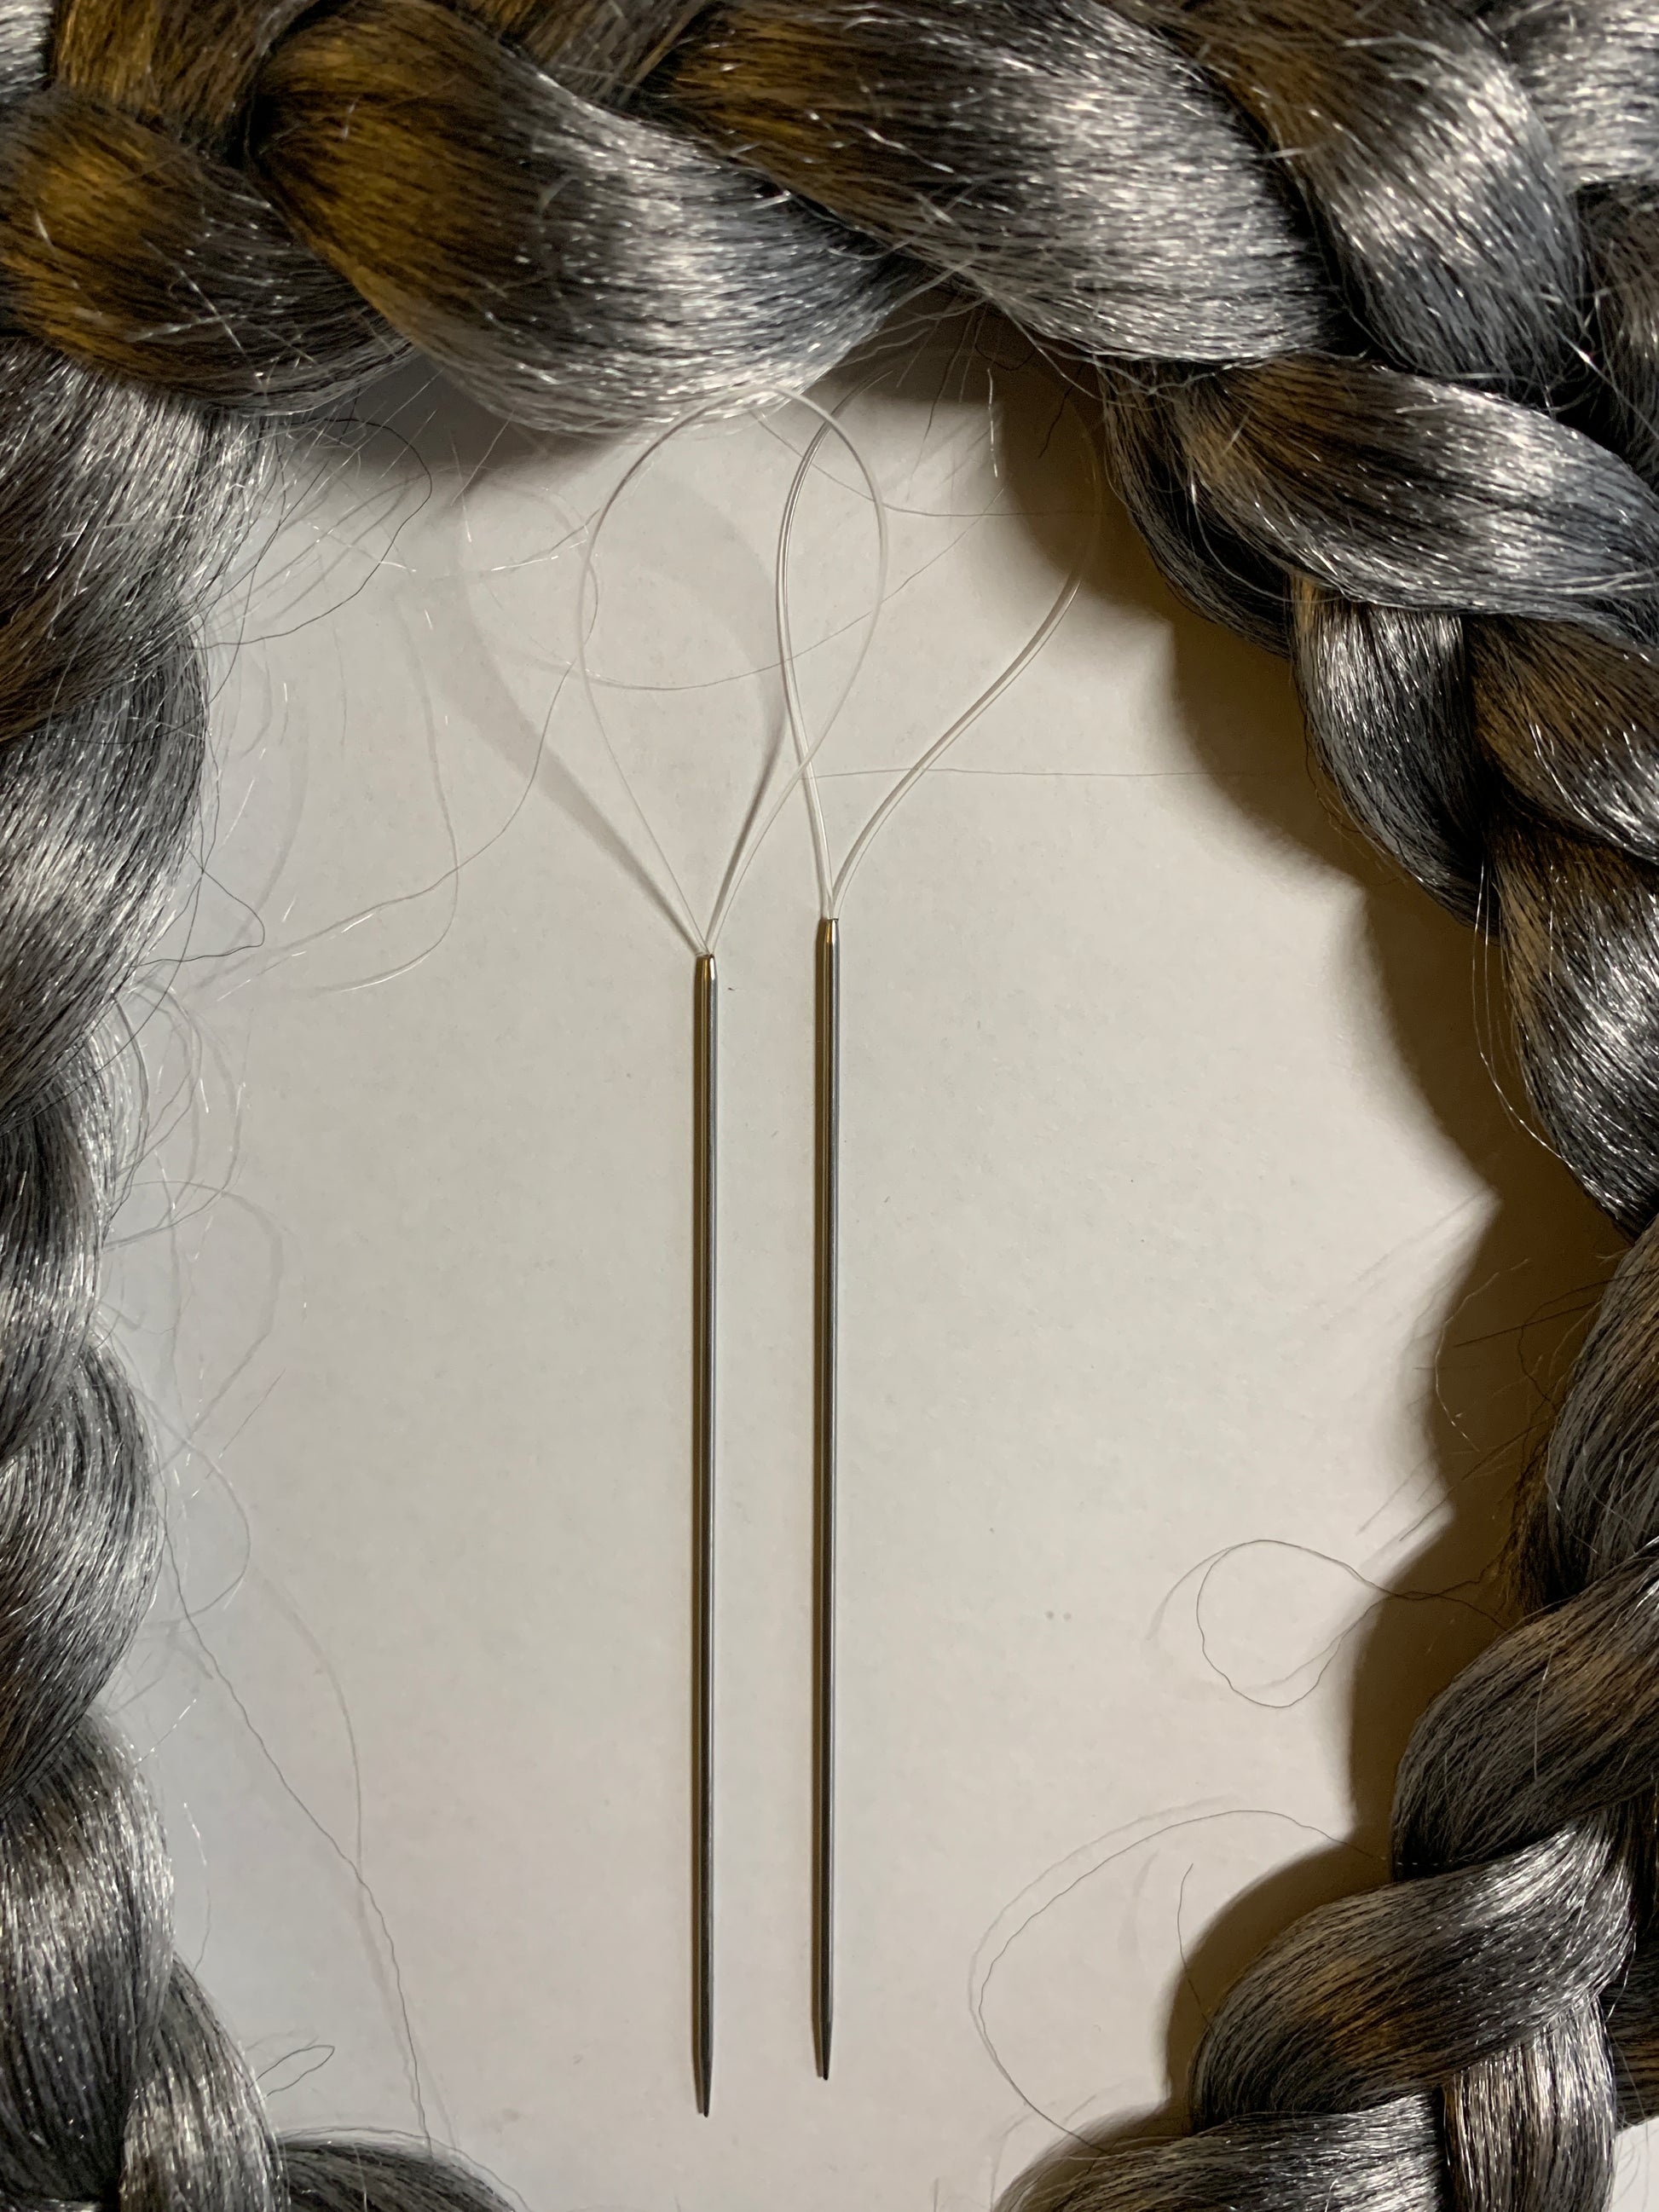 Straight Thin-Tip Knotless Crochet Needle – Magnified Mane